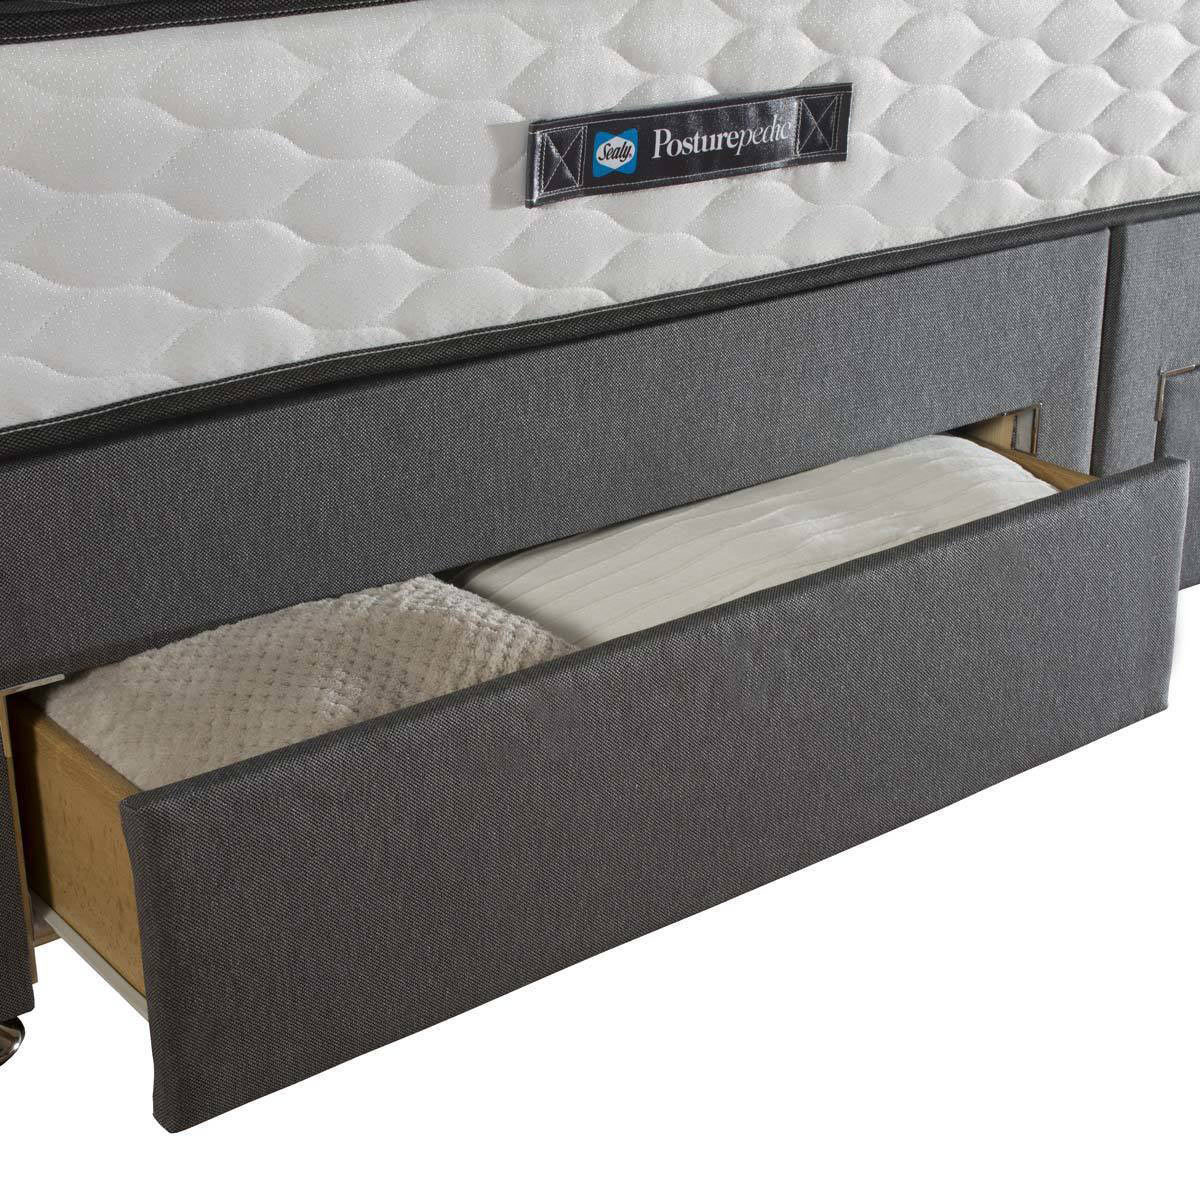 Sealy Symphony Posturetech Memory Mattress & Divan in Charcoal in 4 Sizes